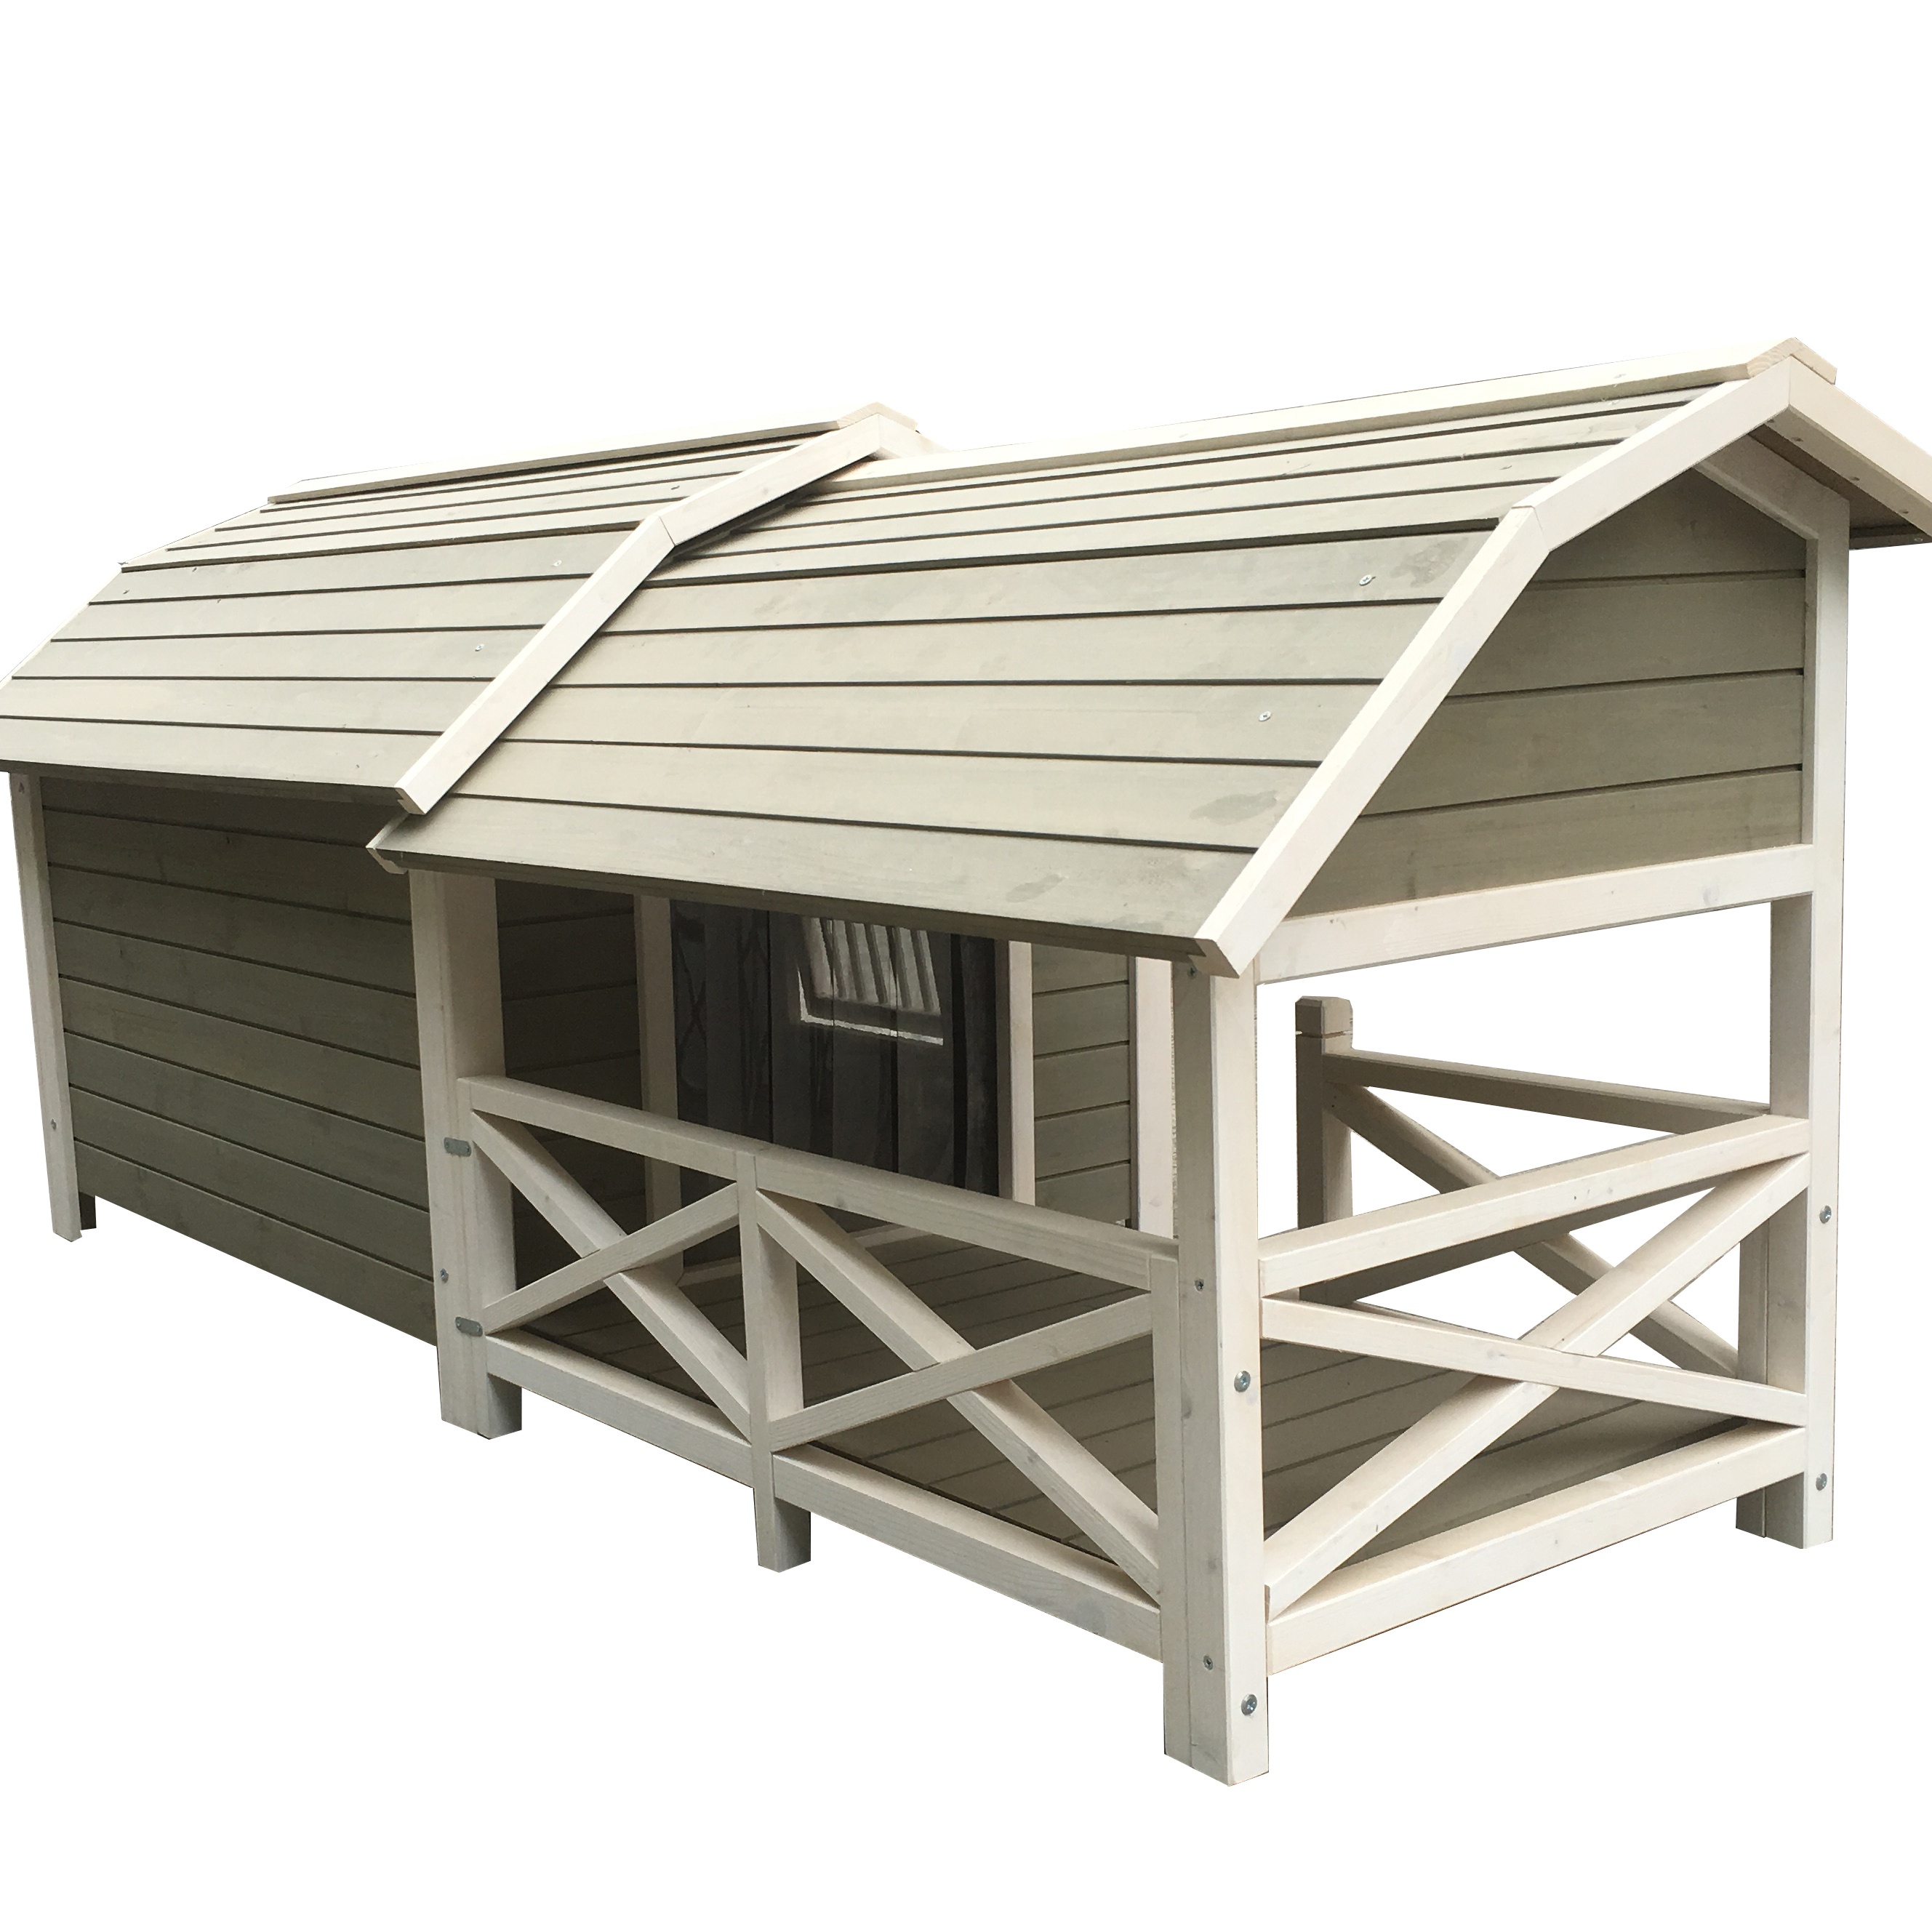 Doghouse Plan Dog Kennel With Leisure Porch For Sun Bathing